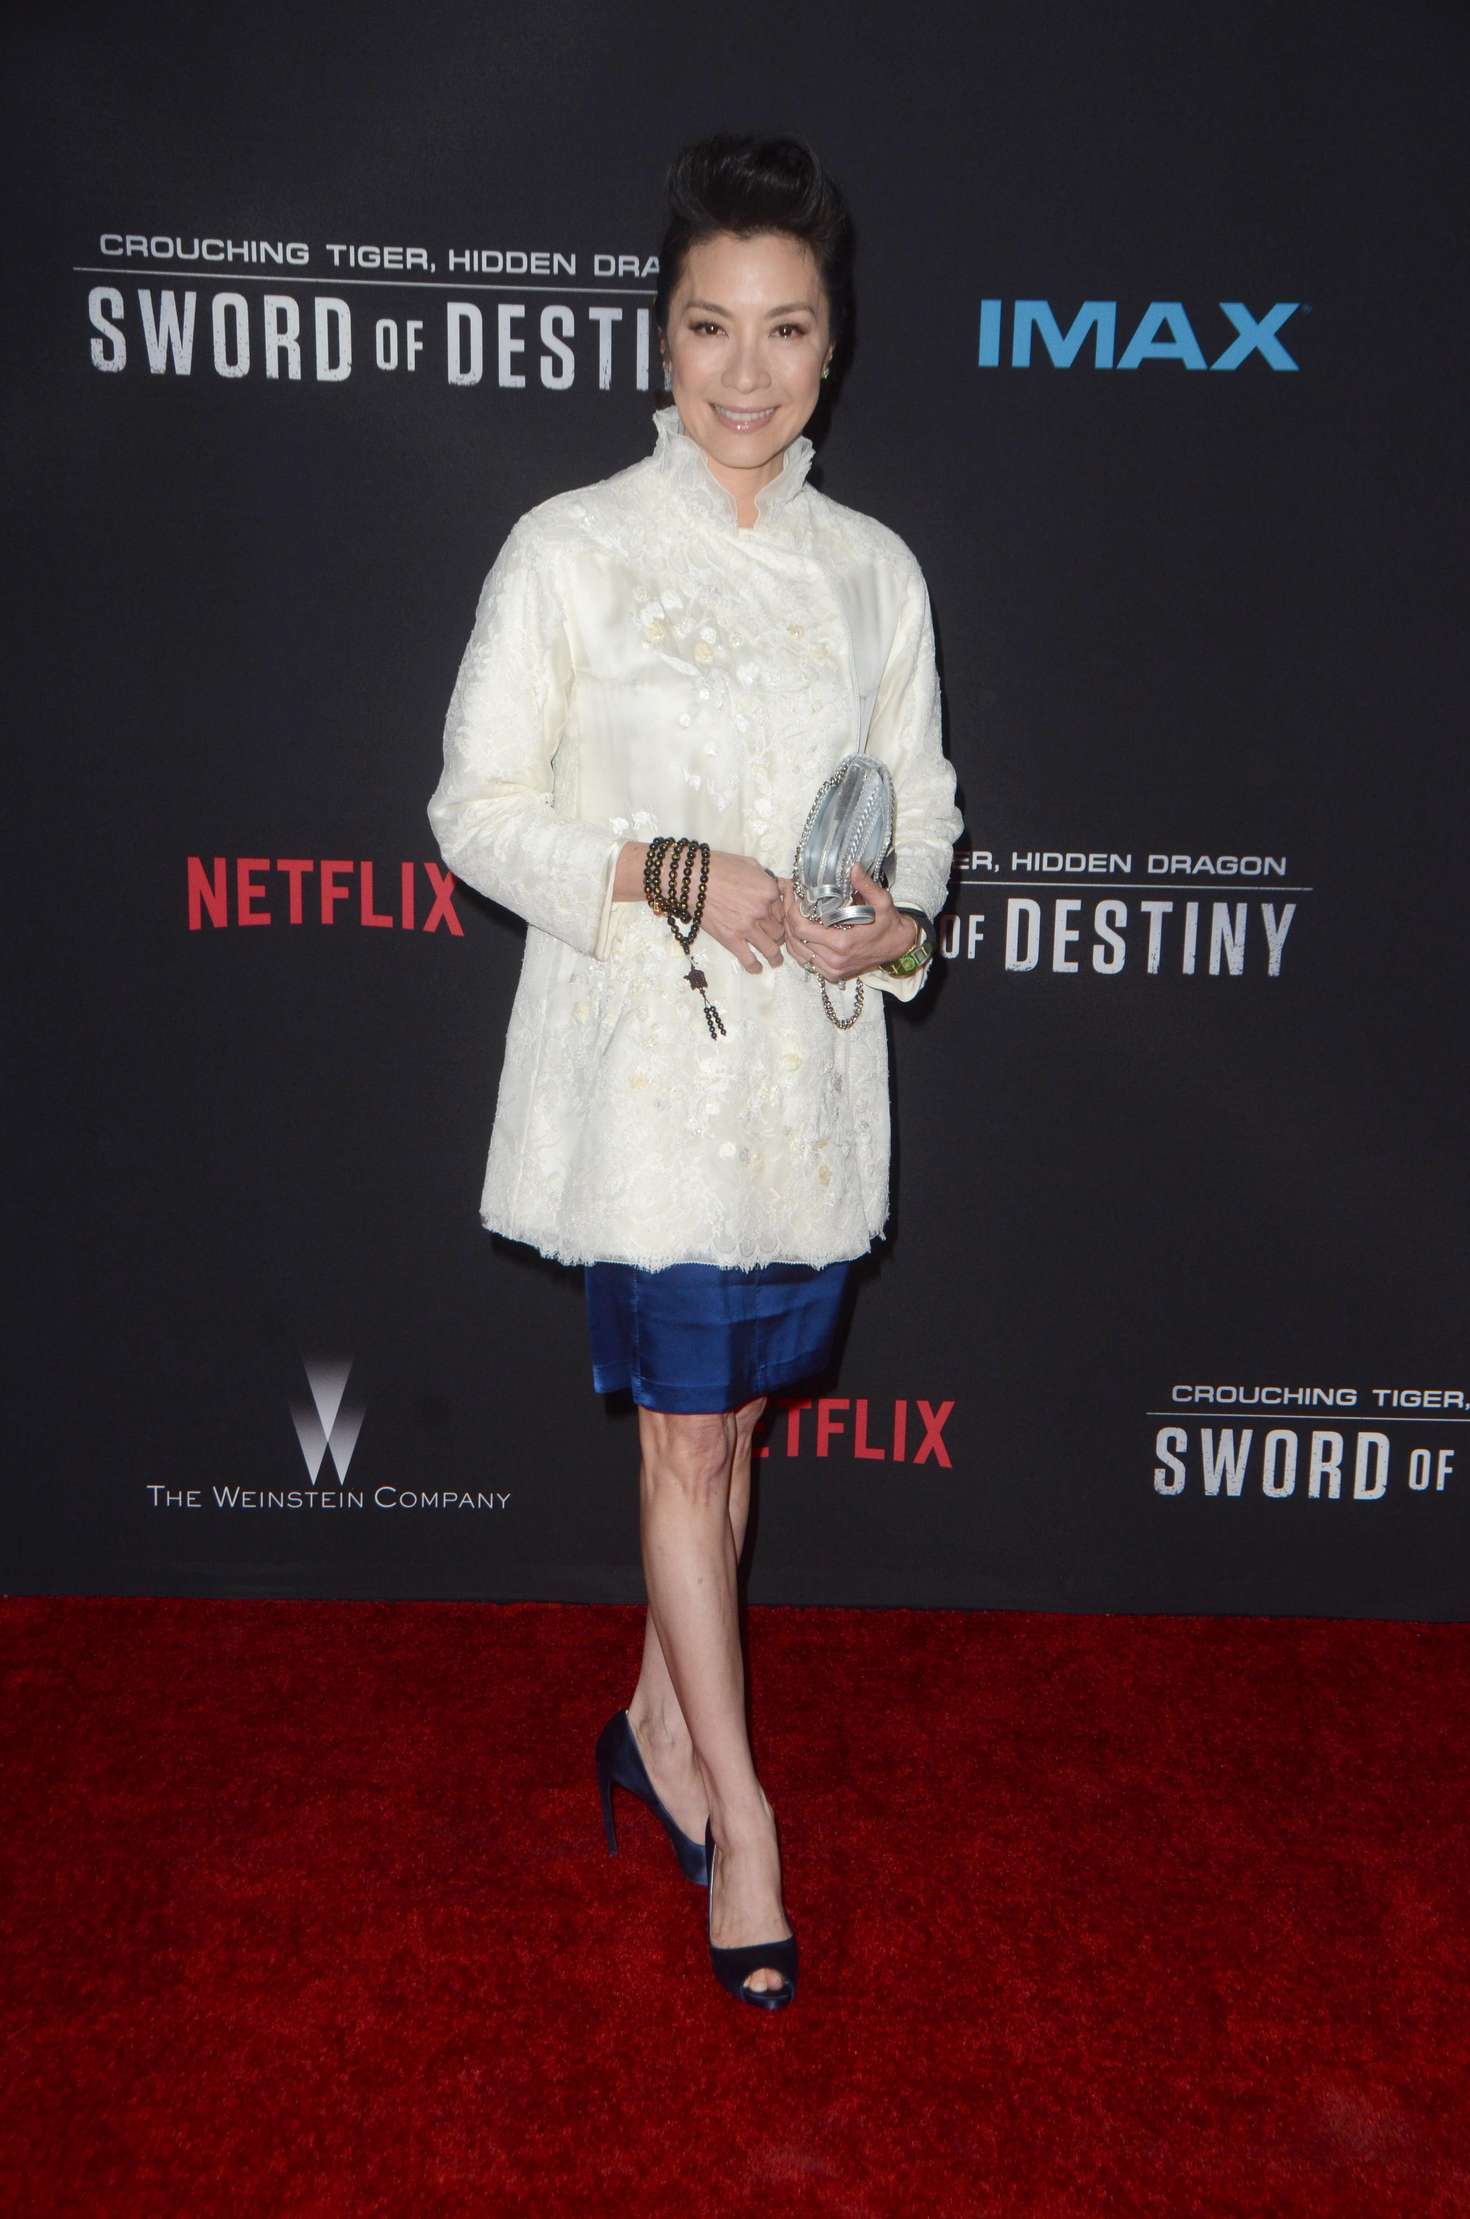 Michelle Yeoh Crouching Tiger Hidden Dragon Sword of Destiny Premiere in Los Angeles